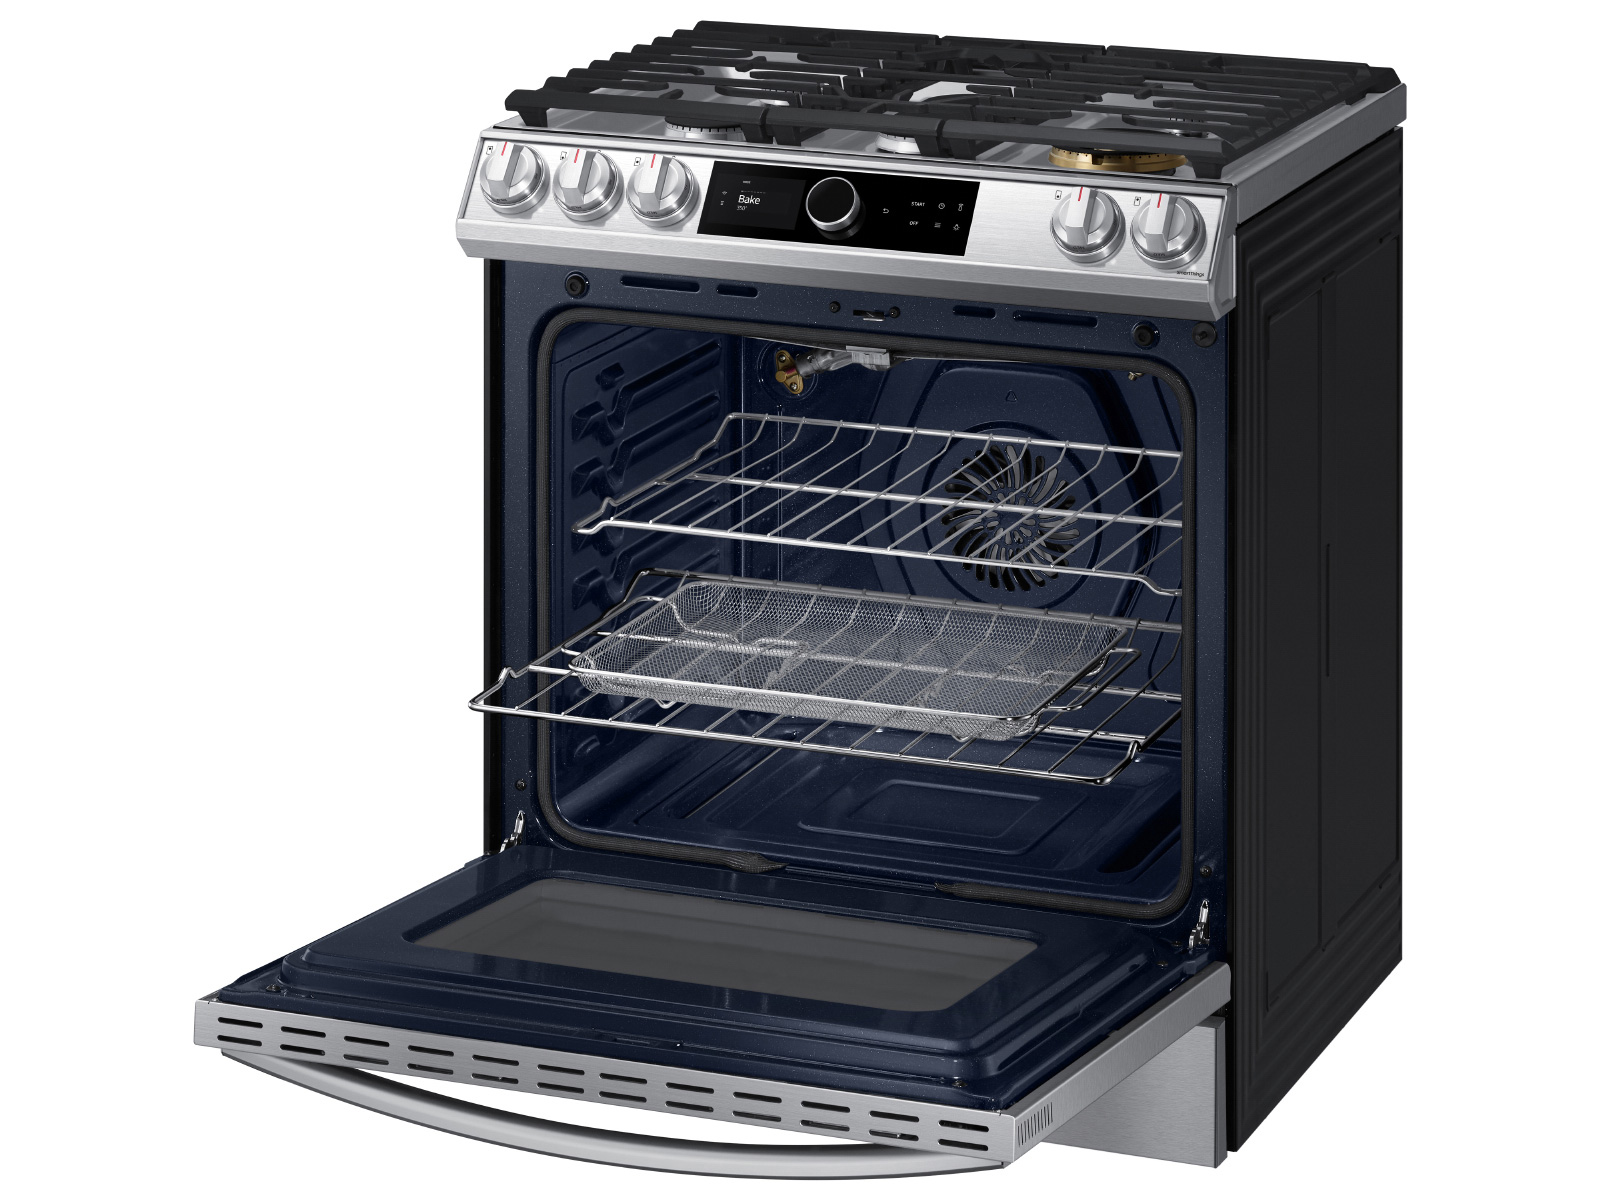 Samsung 30 in. 6.0 cu. ft. Smart Oven Slide-In Gas Range with 5 Sealed  Burners - Stainless Steel